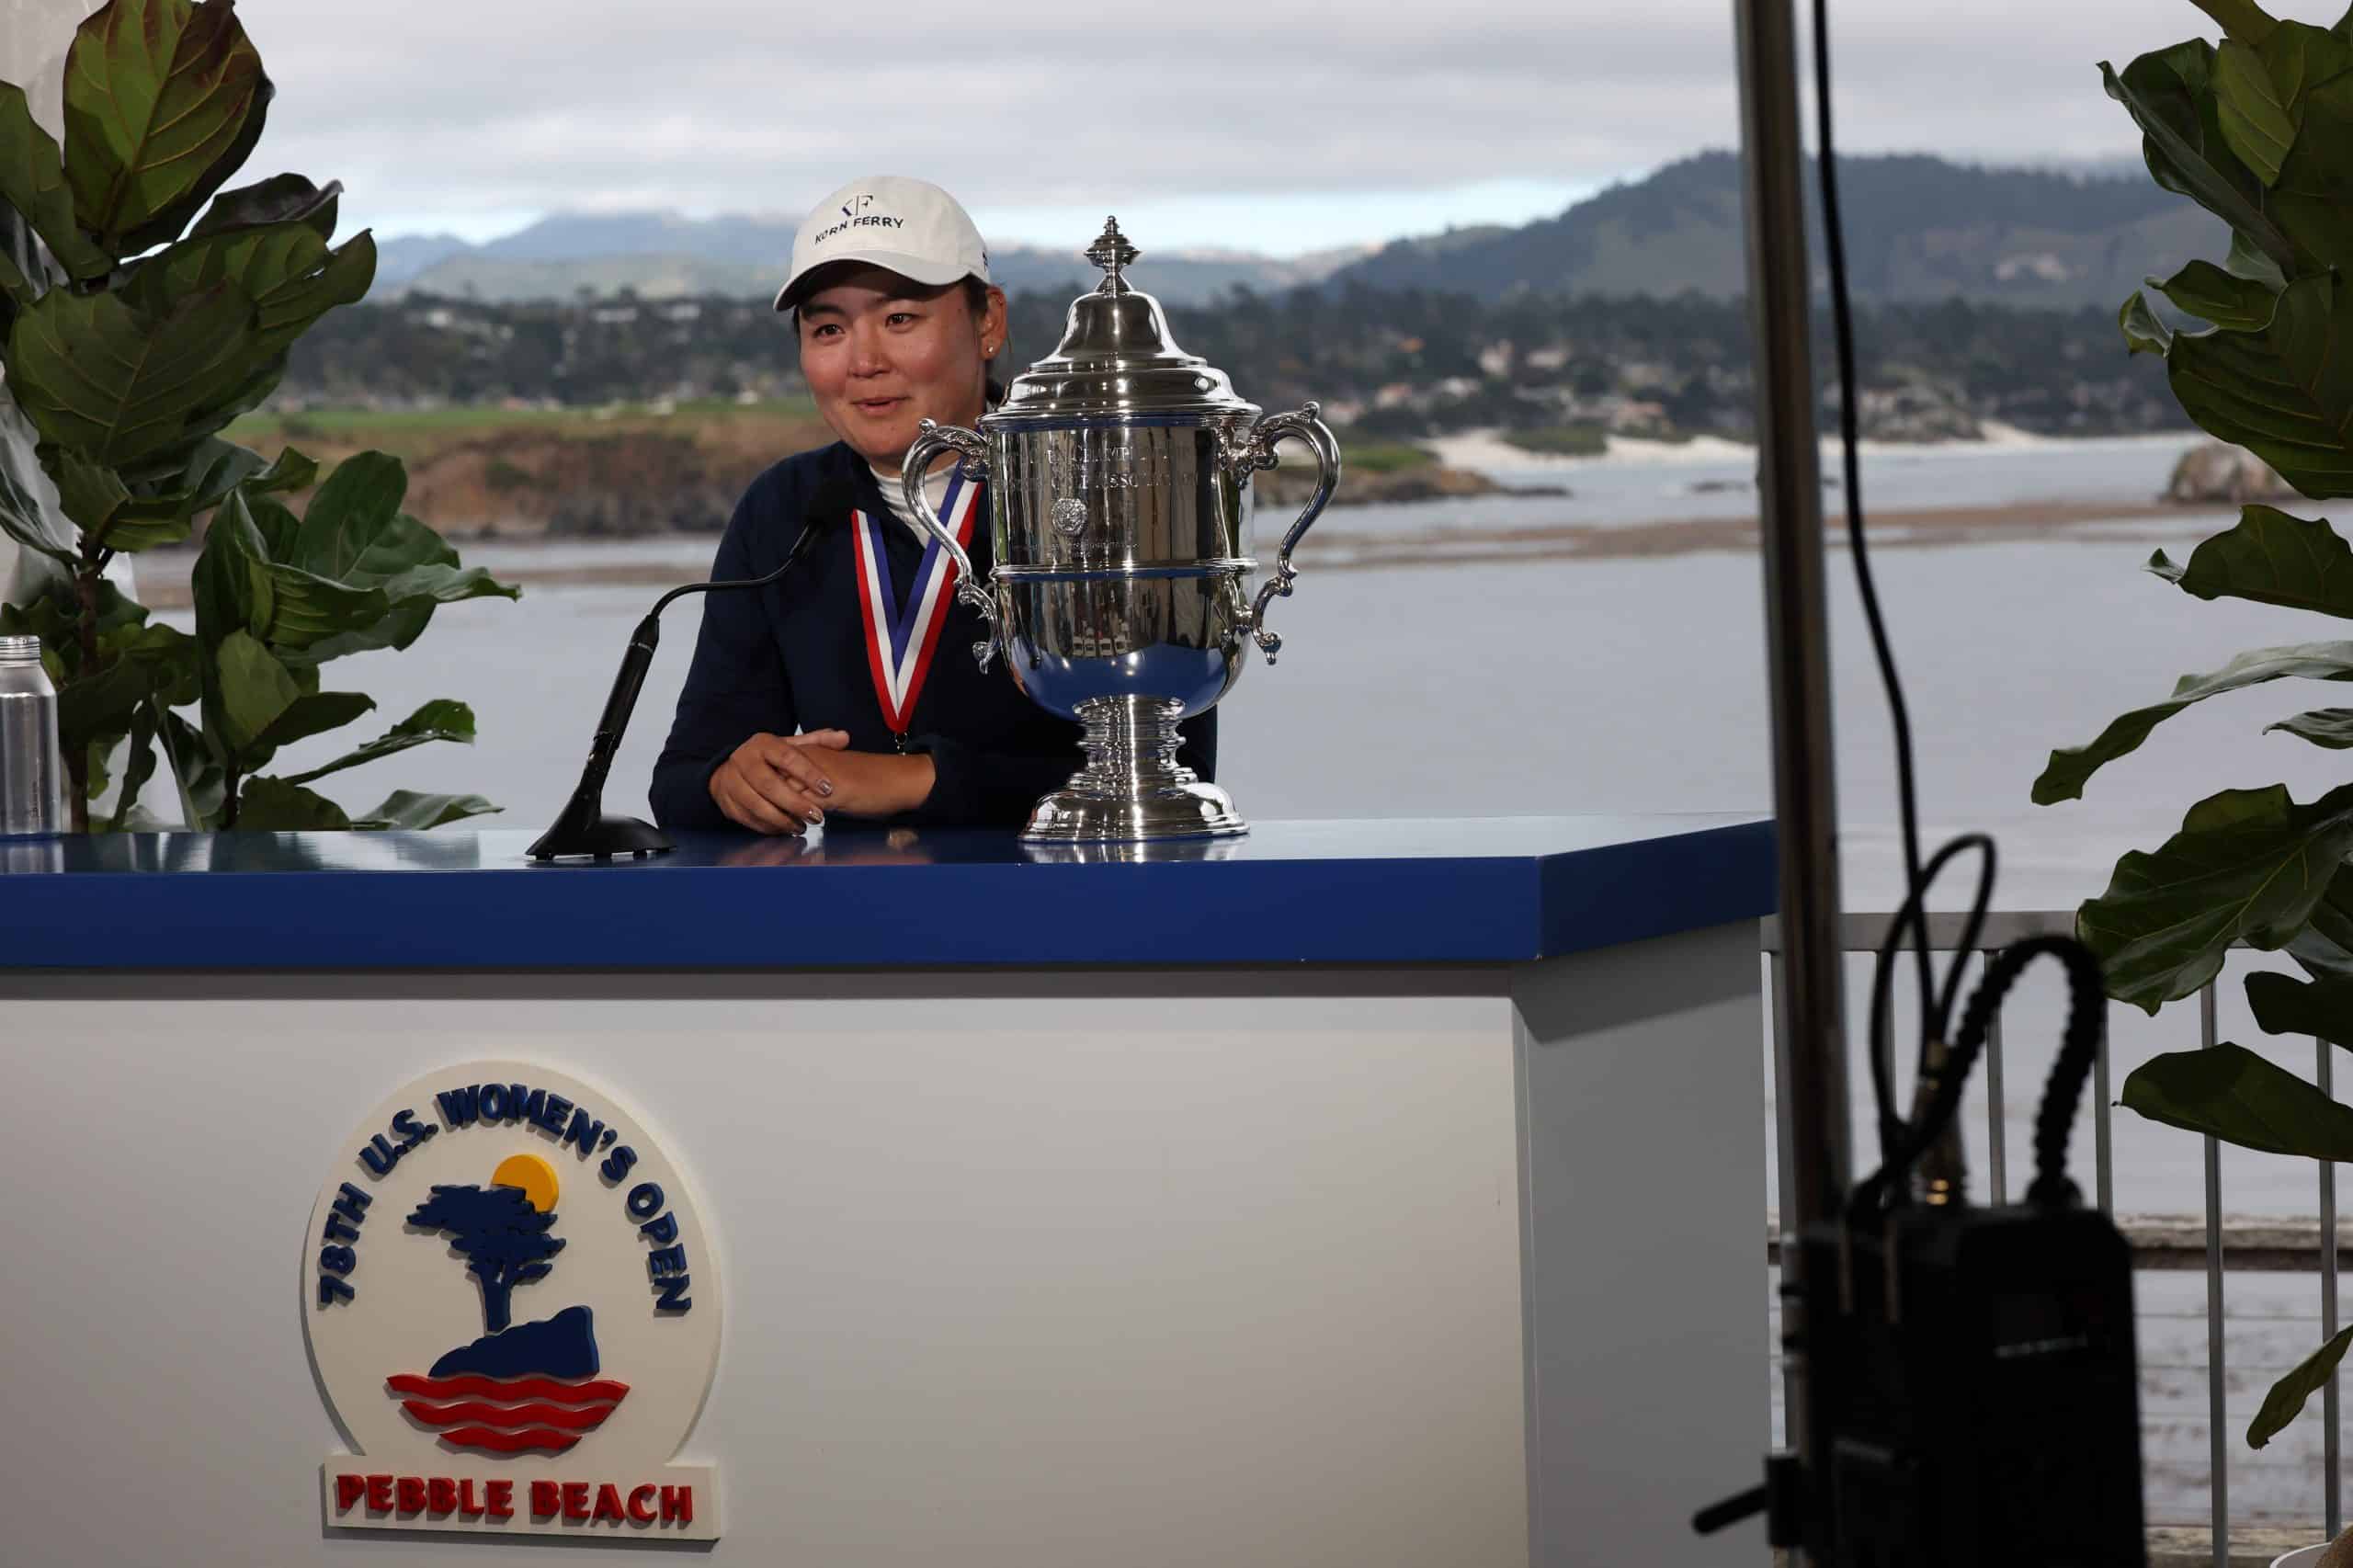 Full viewership across the four-day major in Pebble Beach was up 118% over last year.